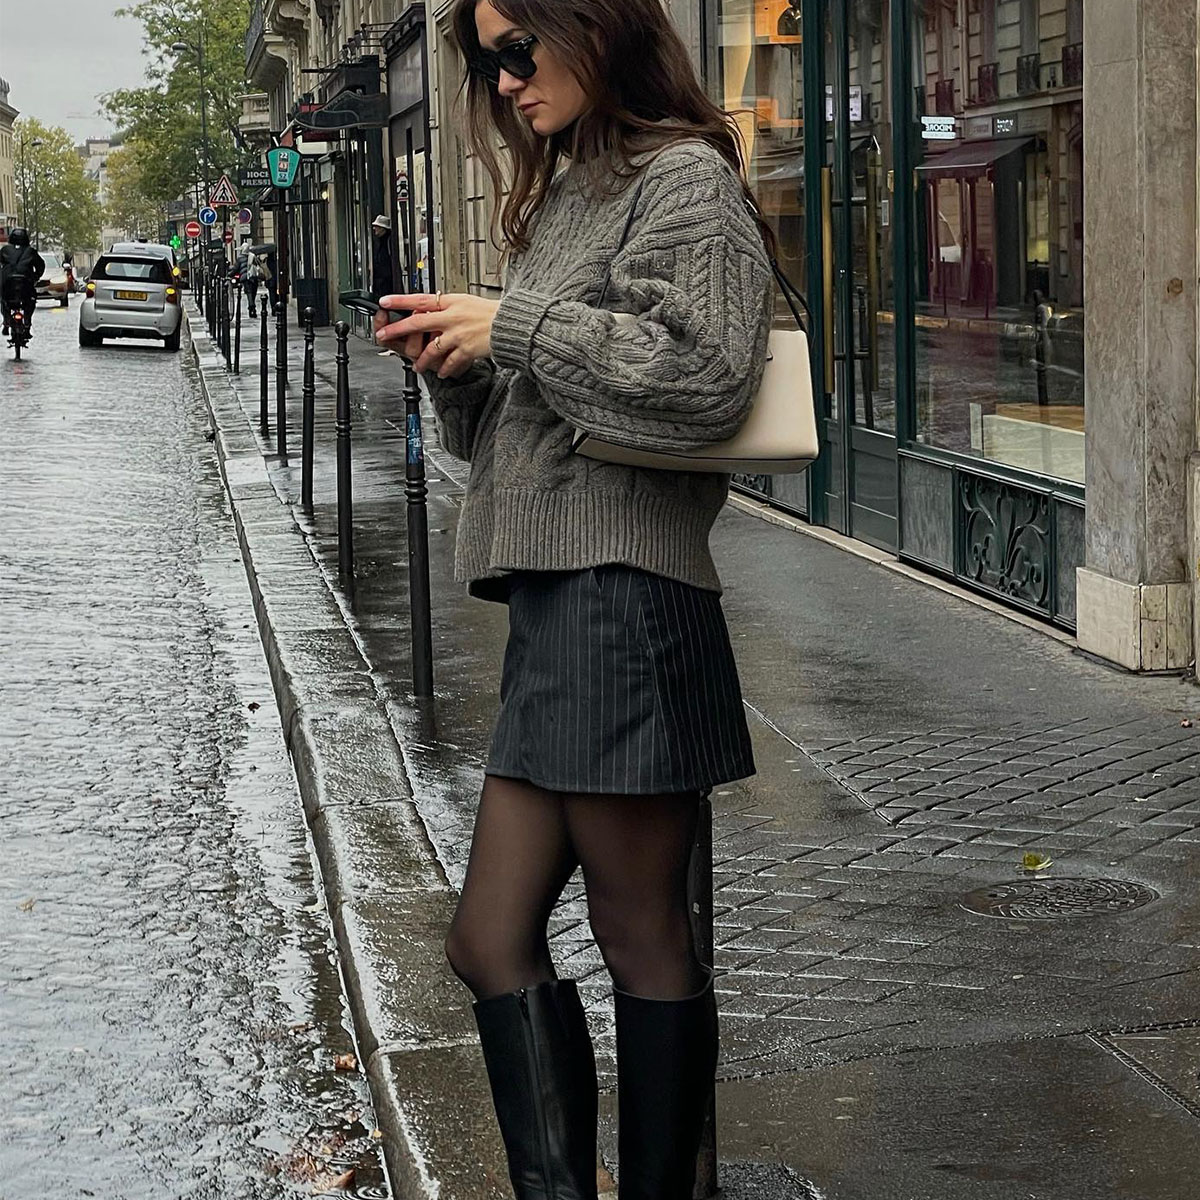 How to Wear Skirt With Boots in Winter 8 Best Ways  The Kosha Journal